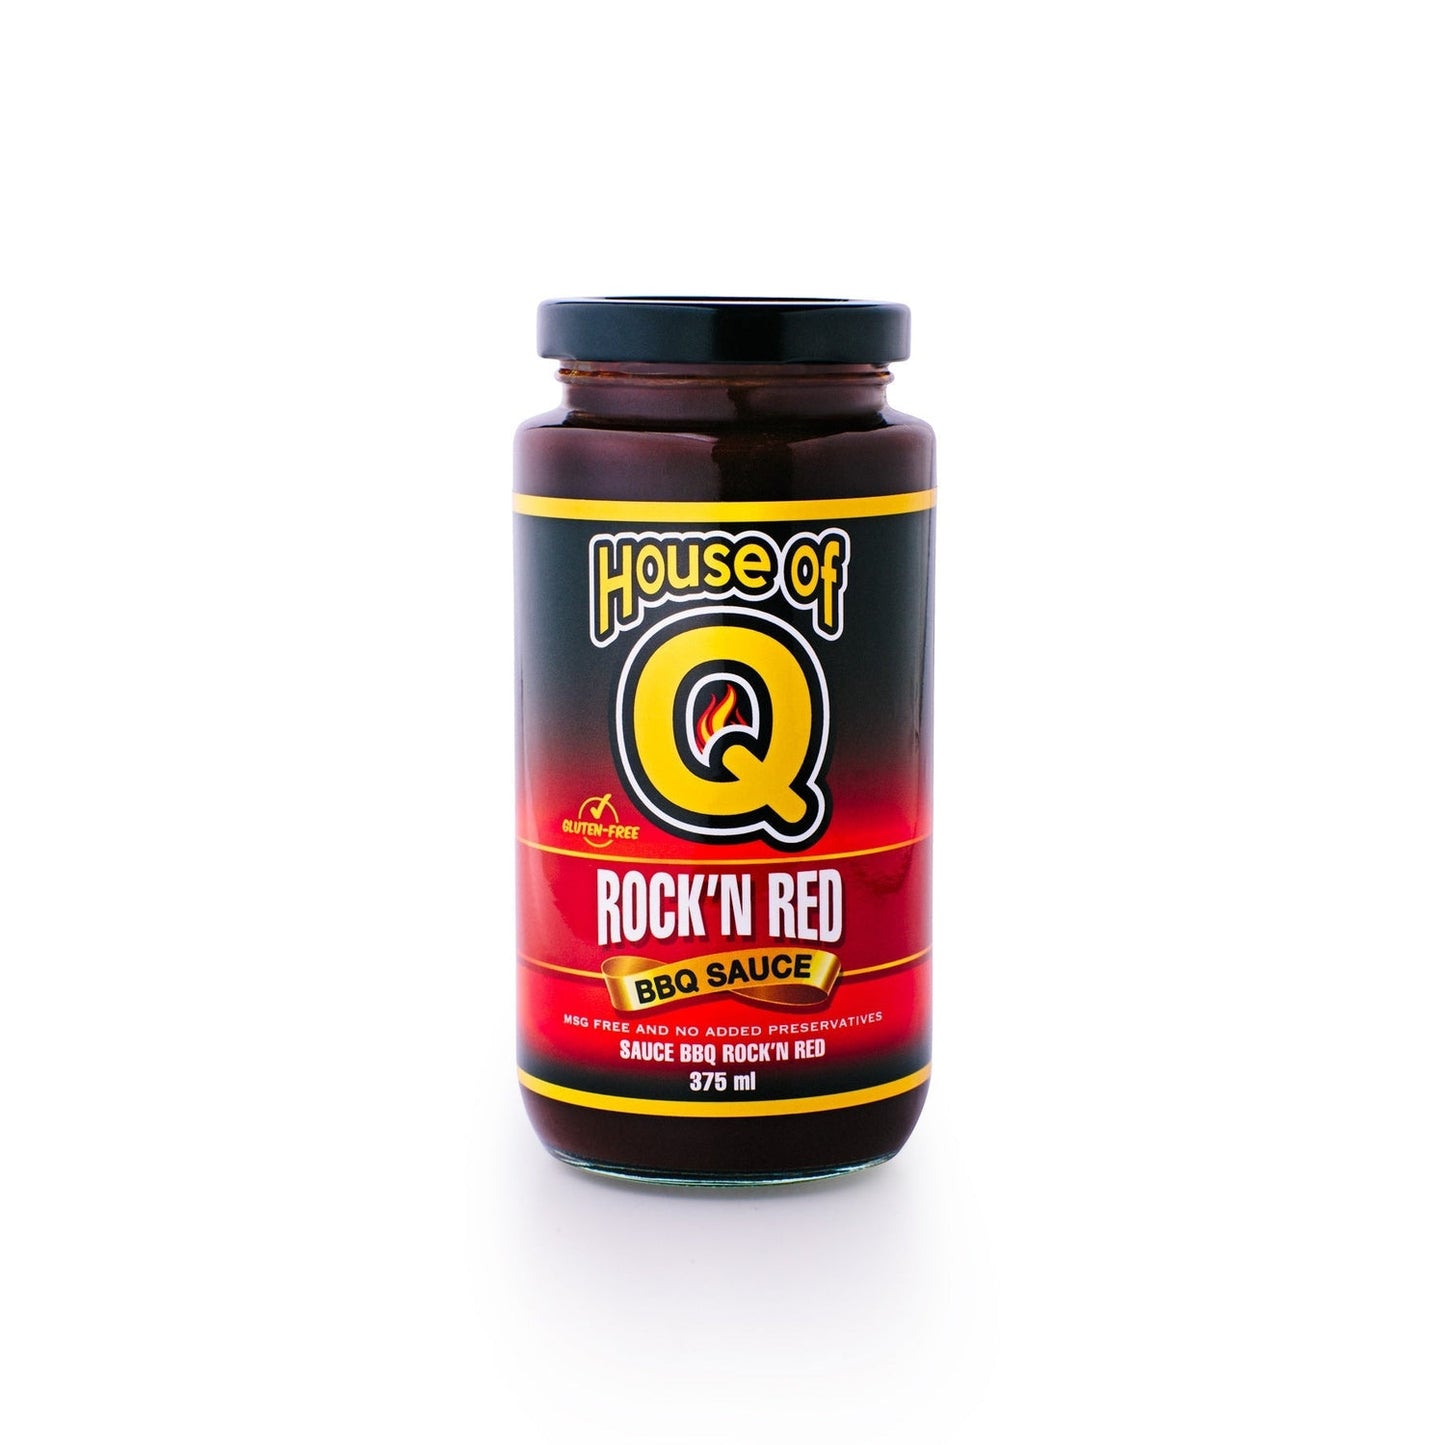 House of Q Rock'n Red BBQ Sauce House of Q Chilliwack BBQ Supply